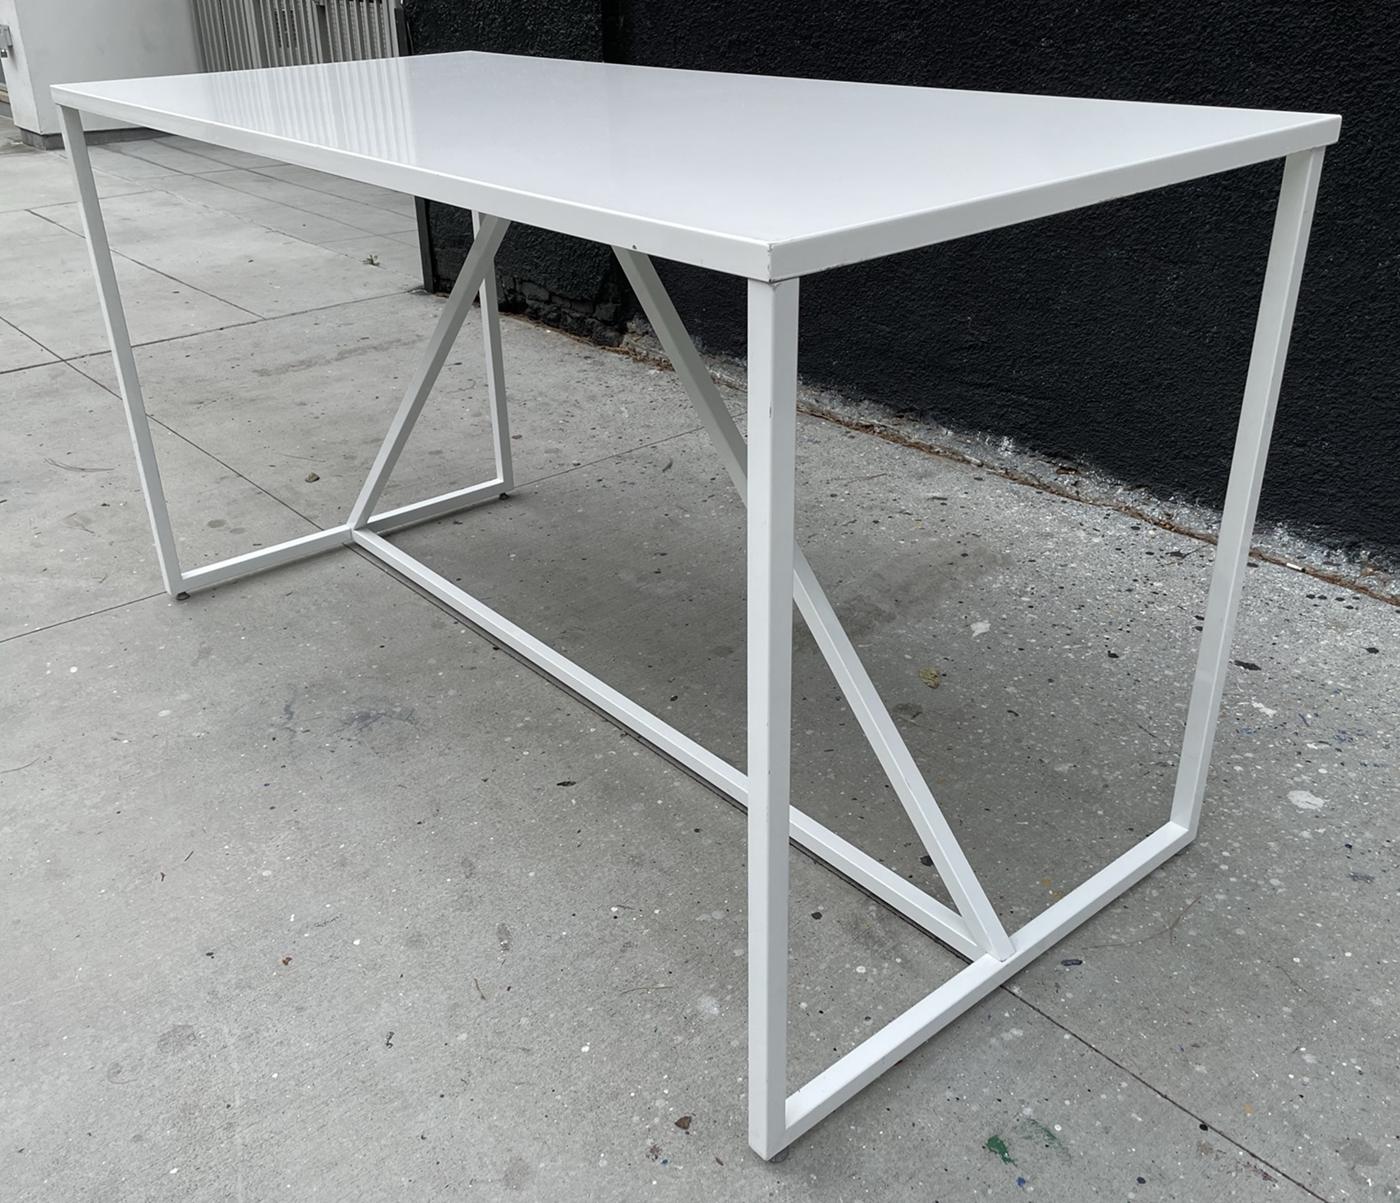 Powder-Coated Desk or Bar Height Table in Metal and Powder Coated